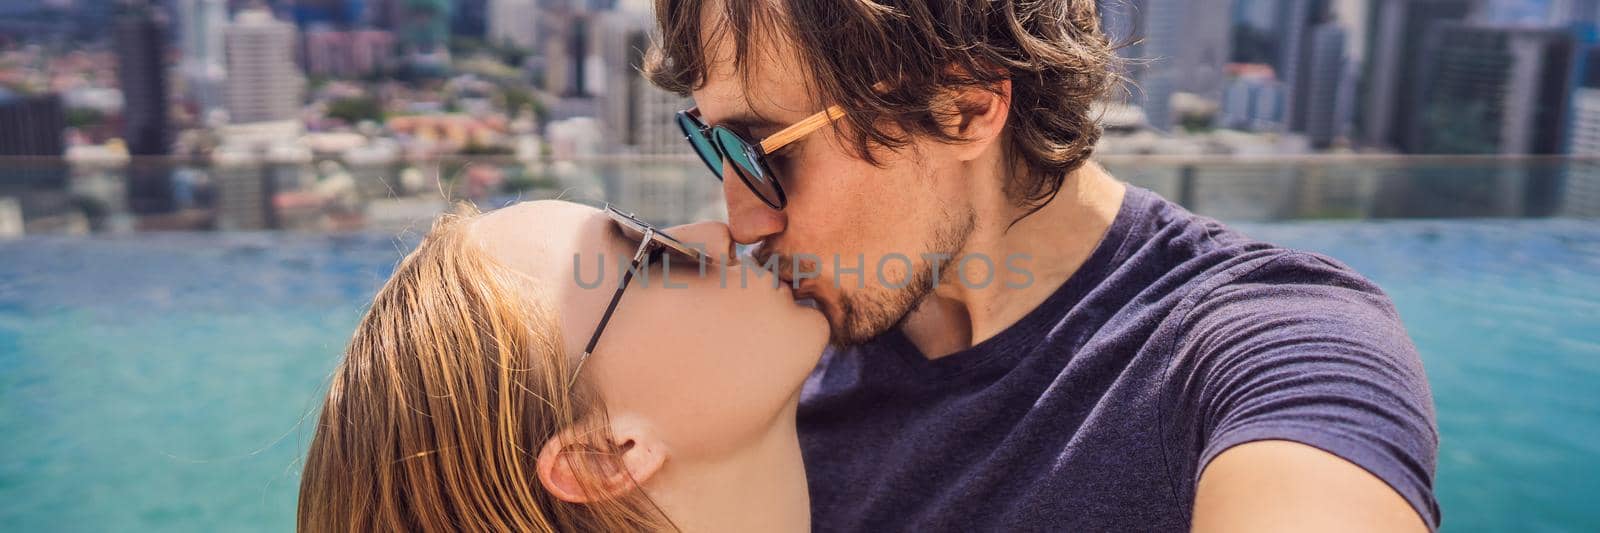 BANNER, LONG FORMAT young happy and attractive playful couple taking selfie picture together at luxury urban hotel infinity pool and panoramic view of the city enjoying holidays honeymoon travel in diversity ethnicity and love by galitskaya